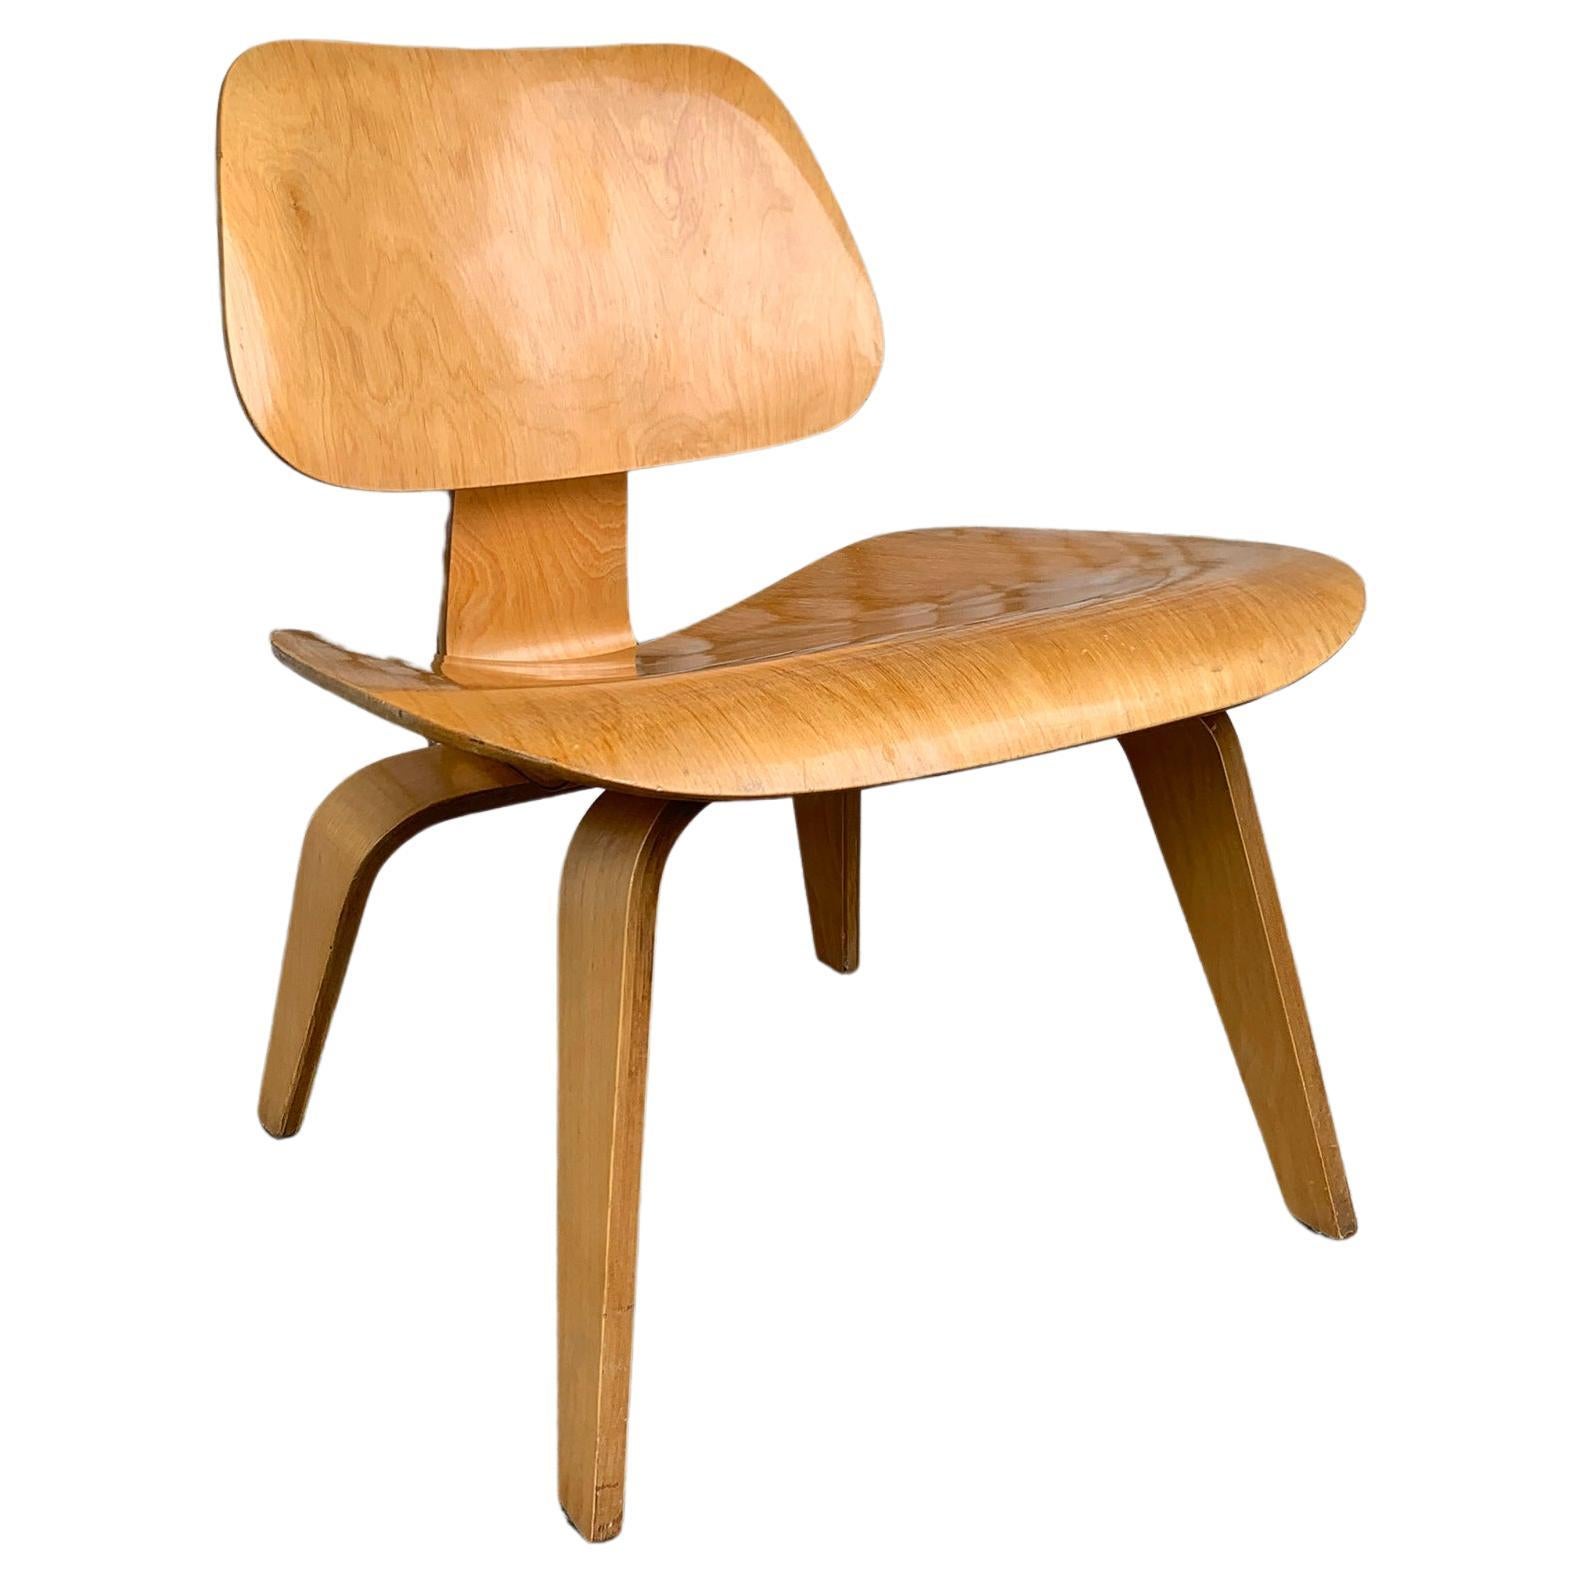 Early LCW Lounge Chair en bouleau par Charles and Ray Eames, Herman Miller, années 1950